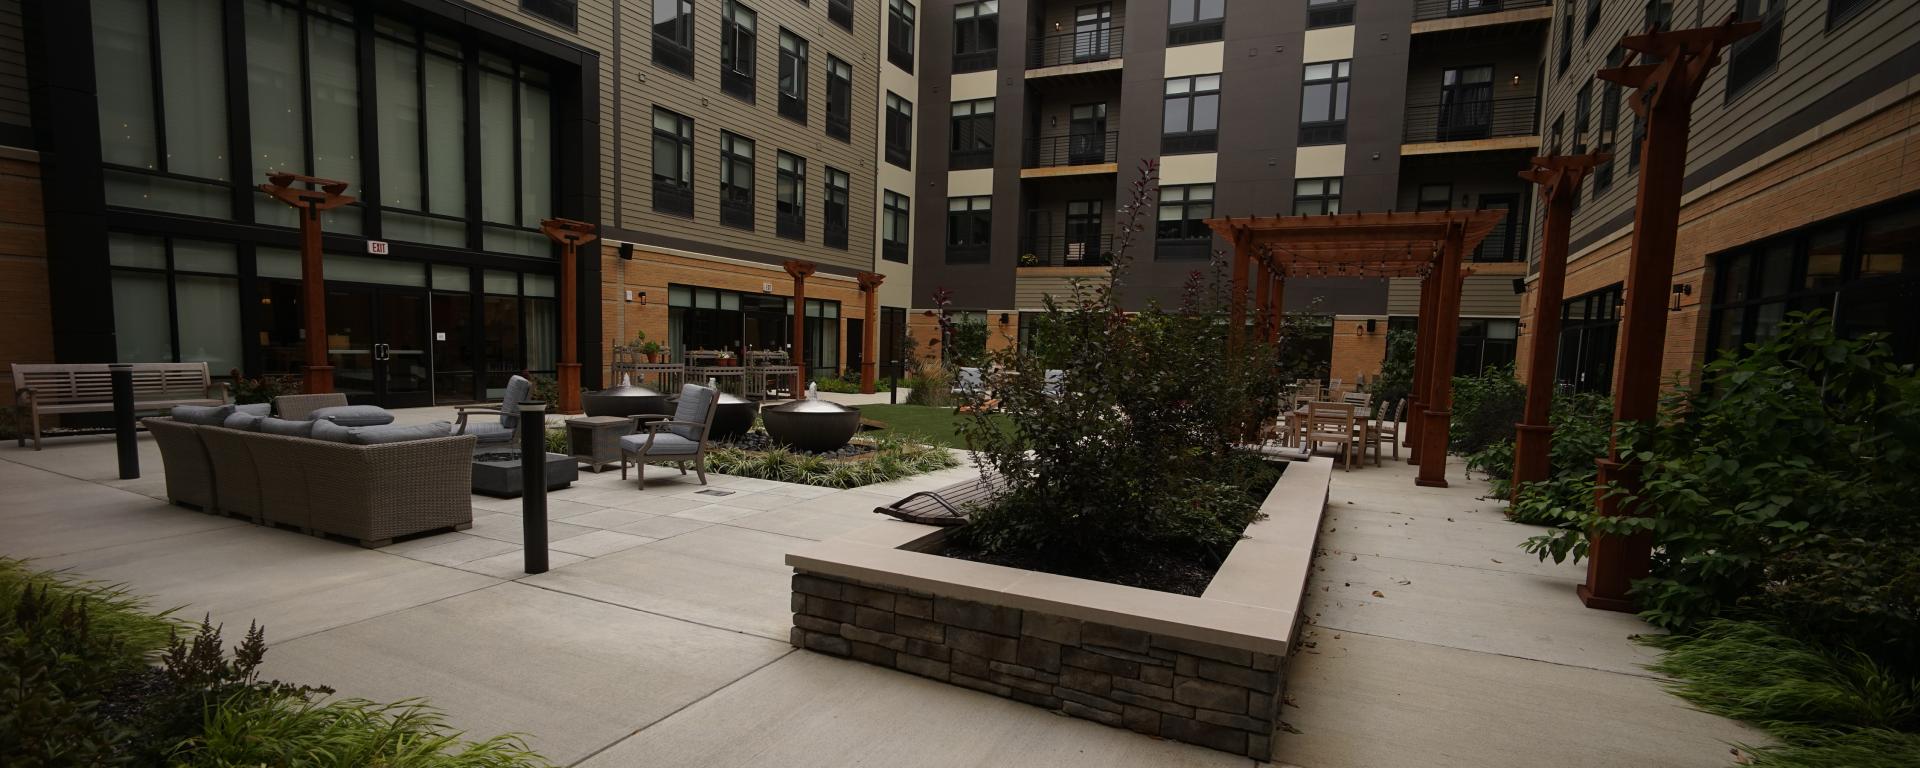 apartment courtyard with plantings and benches